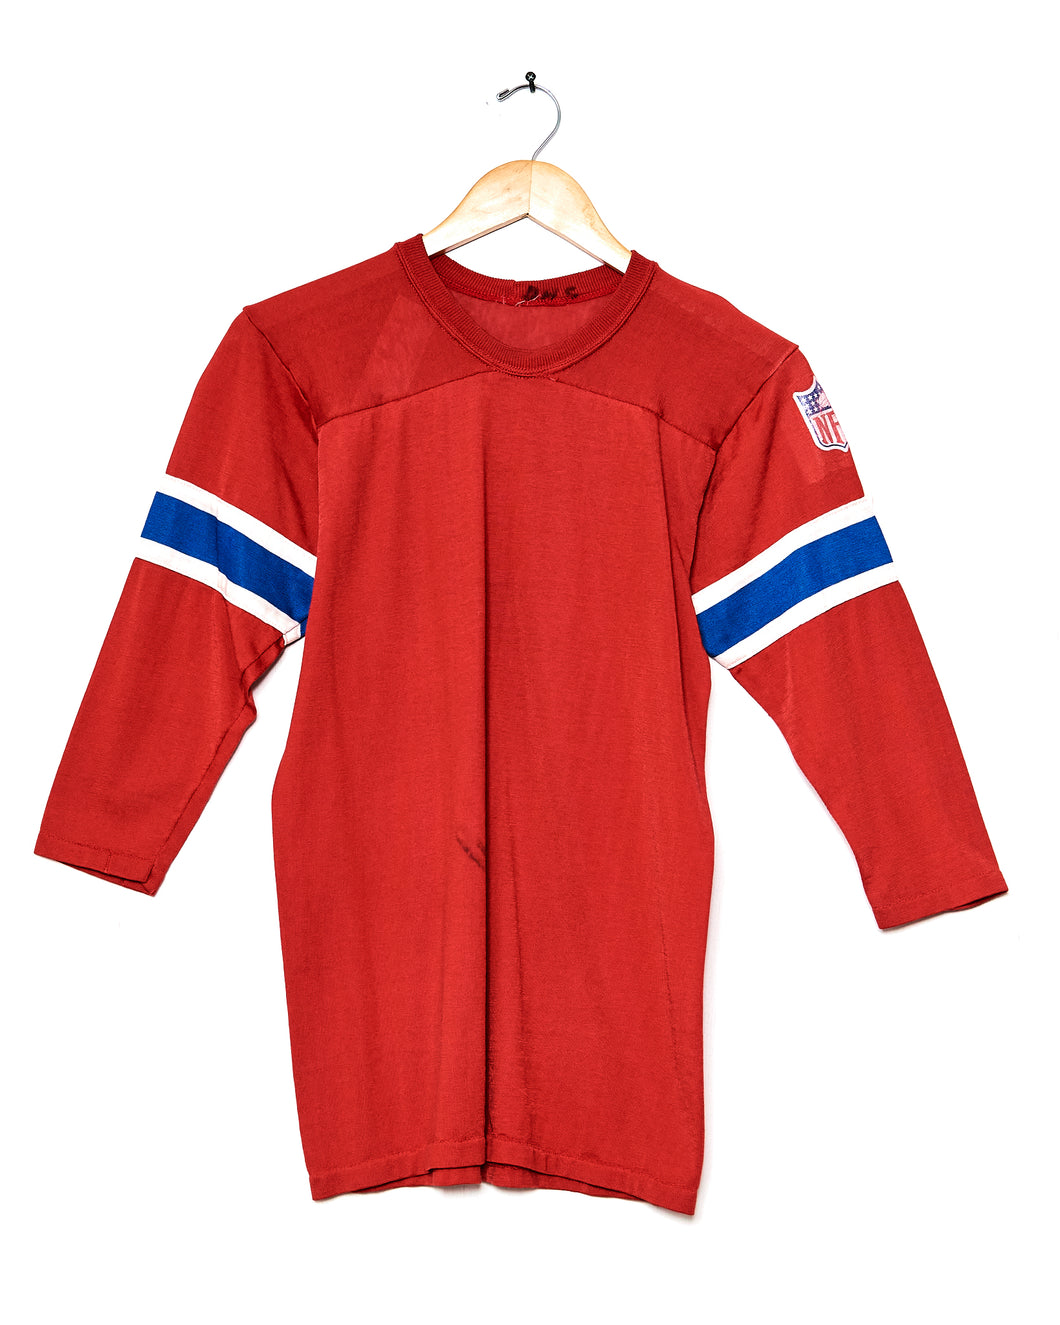 1970's Rayon NFL Jersey